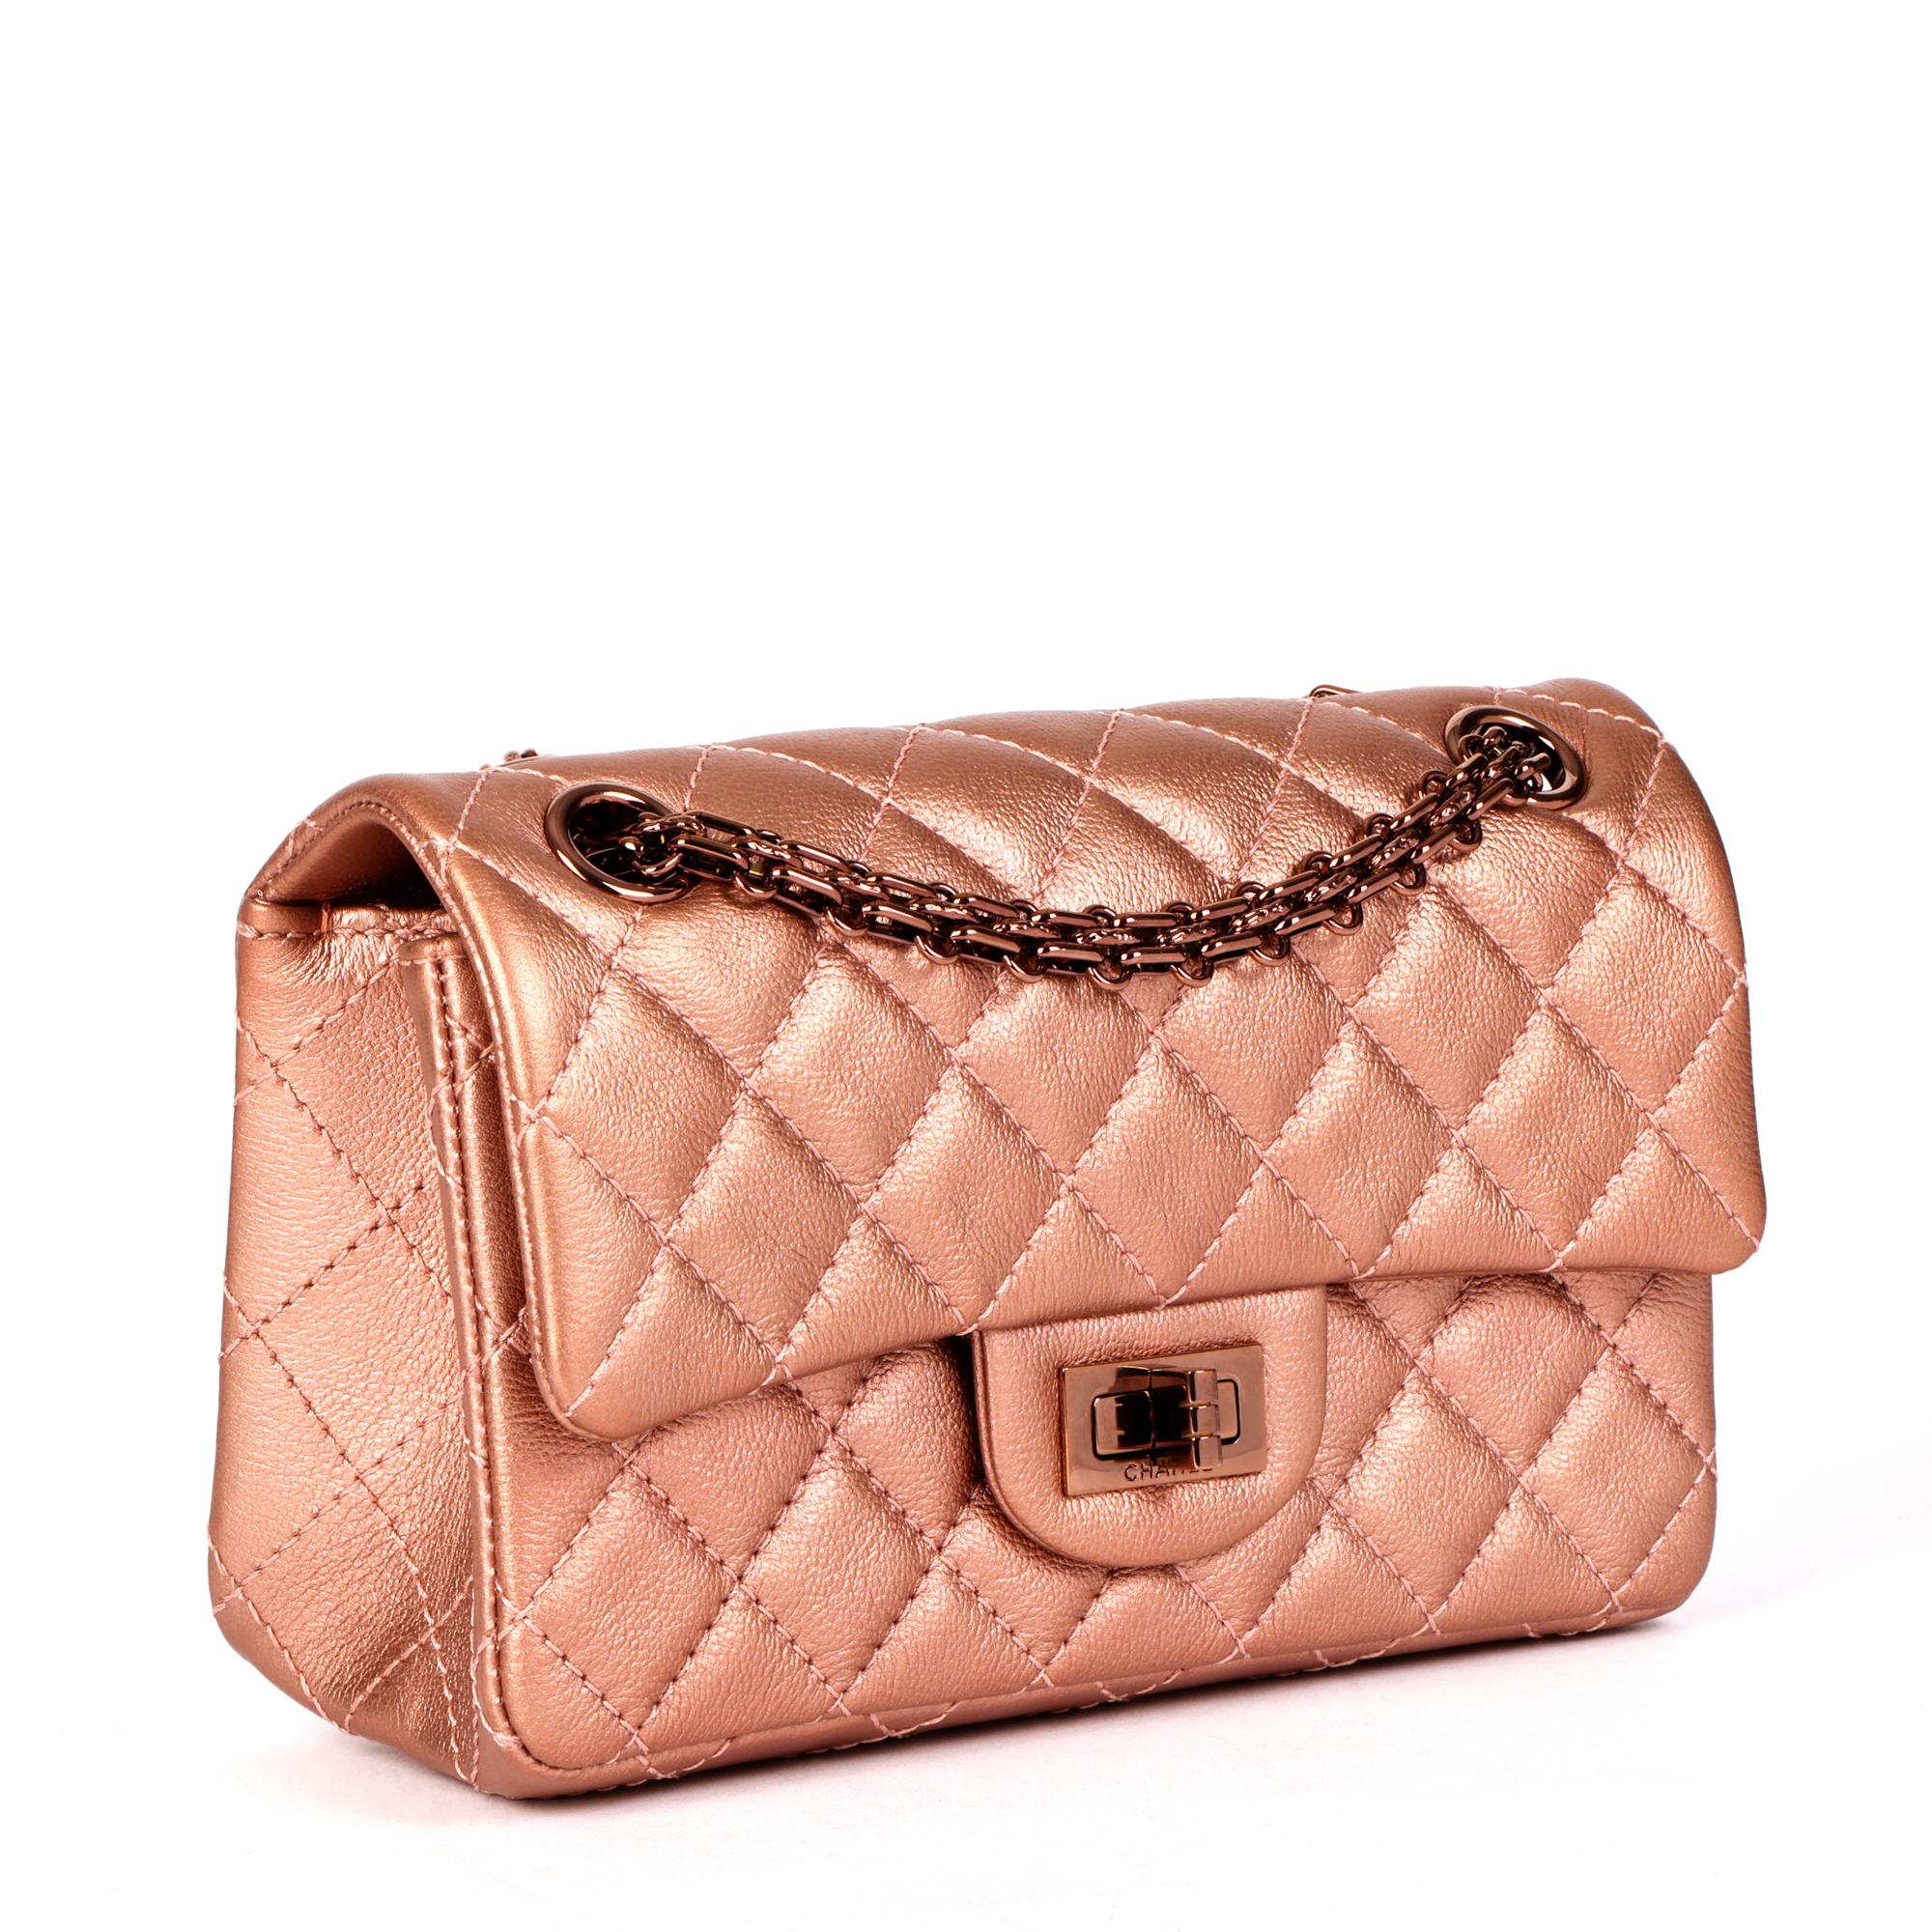 CHANEL
Rose Gold Metallic Aged Calfskin Leather 224 2.55 Reissue Double Flap Bag

Xupes Reference: HB4422
Serial Number: K978L8NK
Age (Circa): 2021
Accompanied By: Chanel Dust Bag, Box, Care Booklet
Authenticity Details: Microchip (Made in